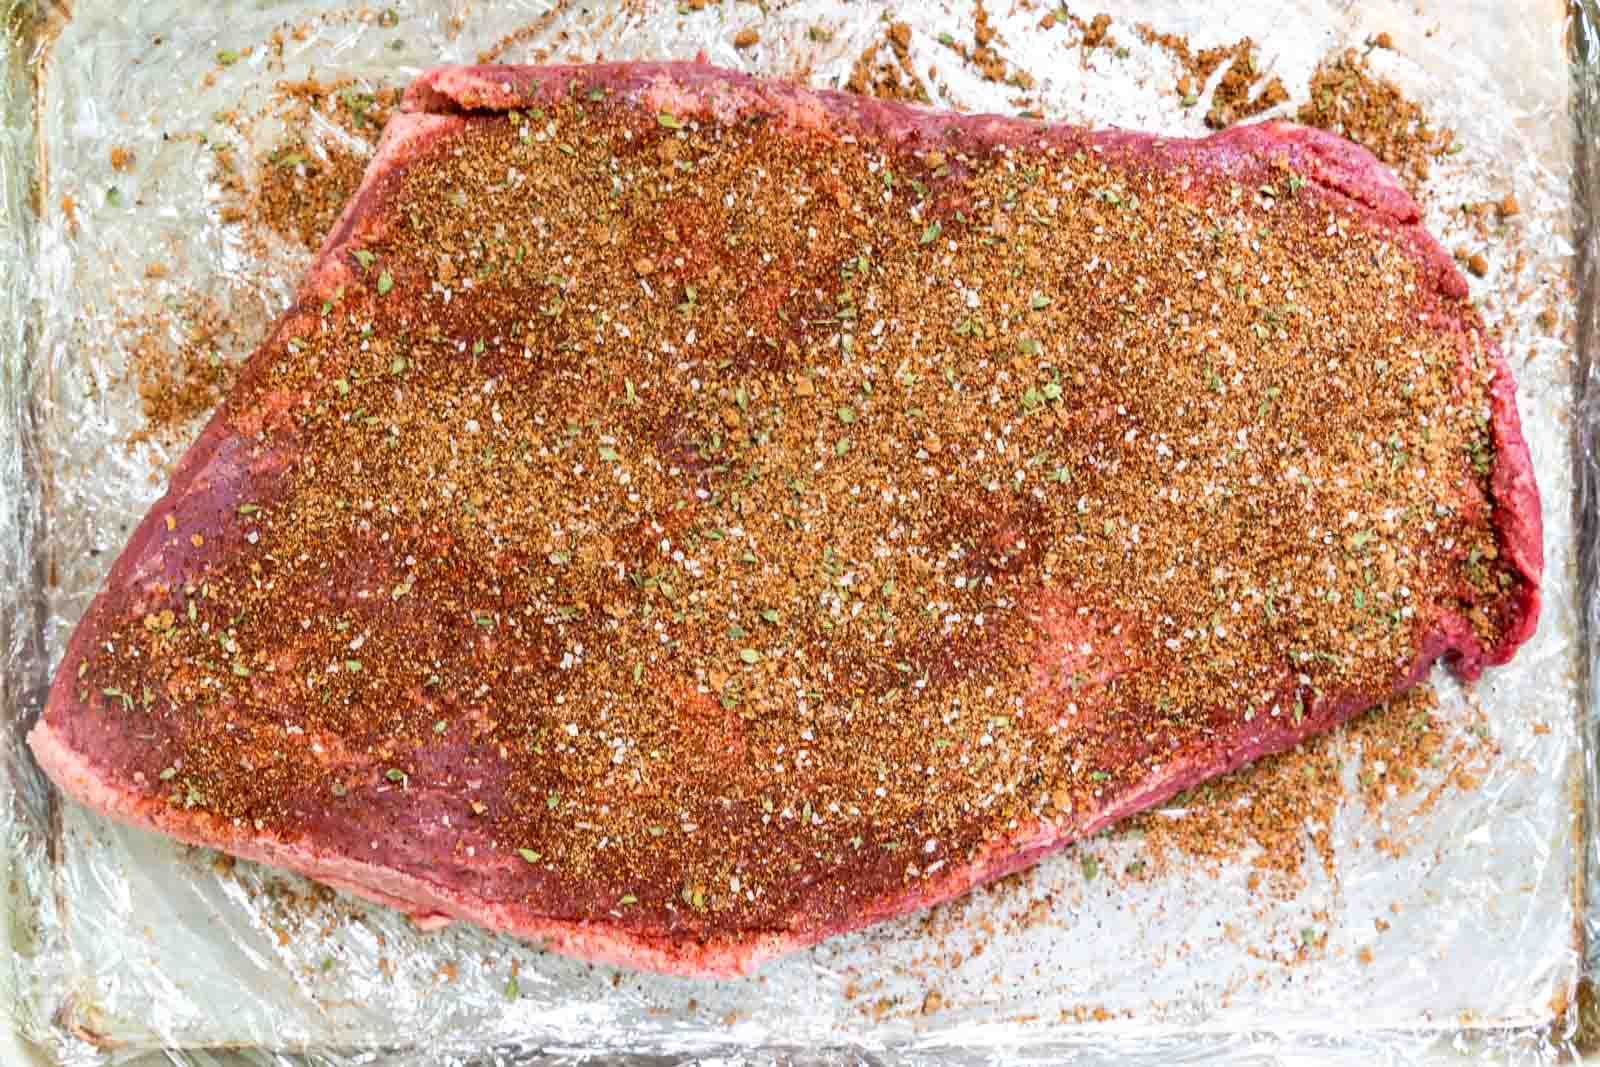 A beef brisket covered in dry rub ingredients